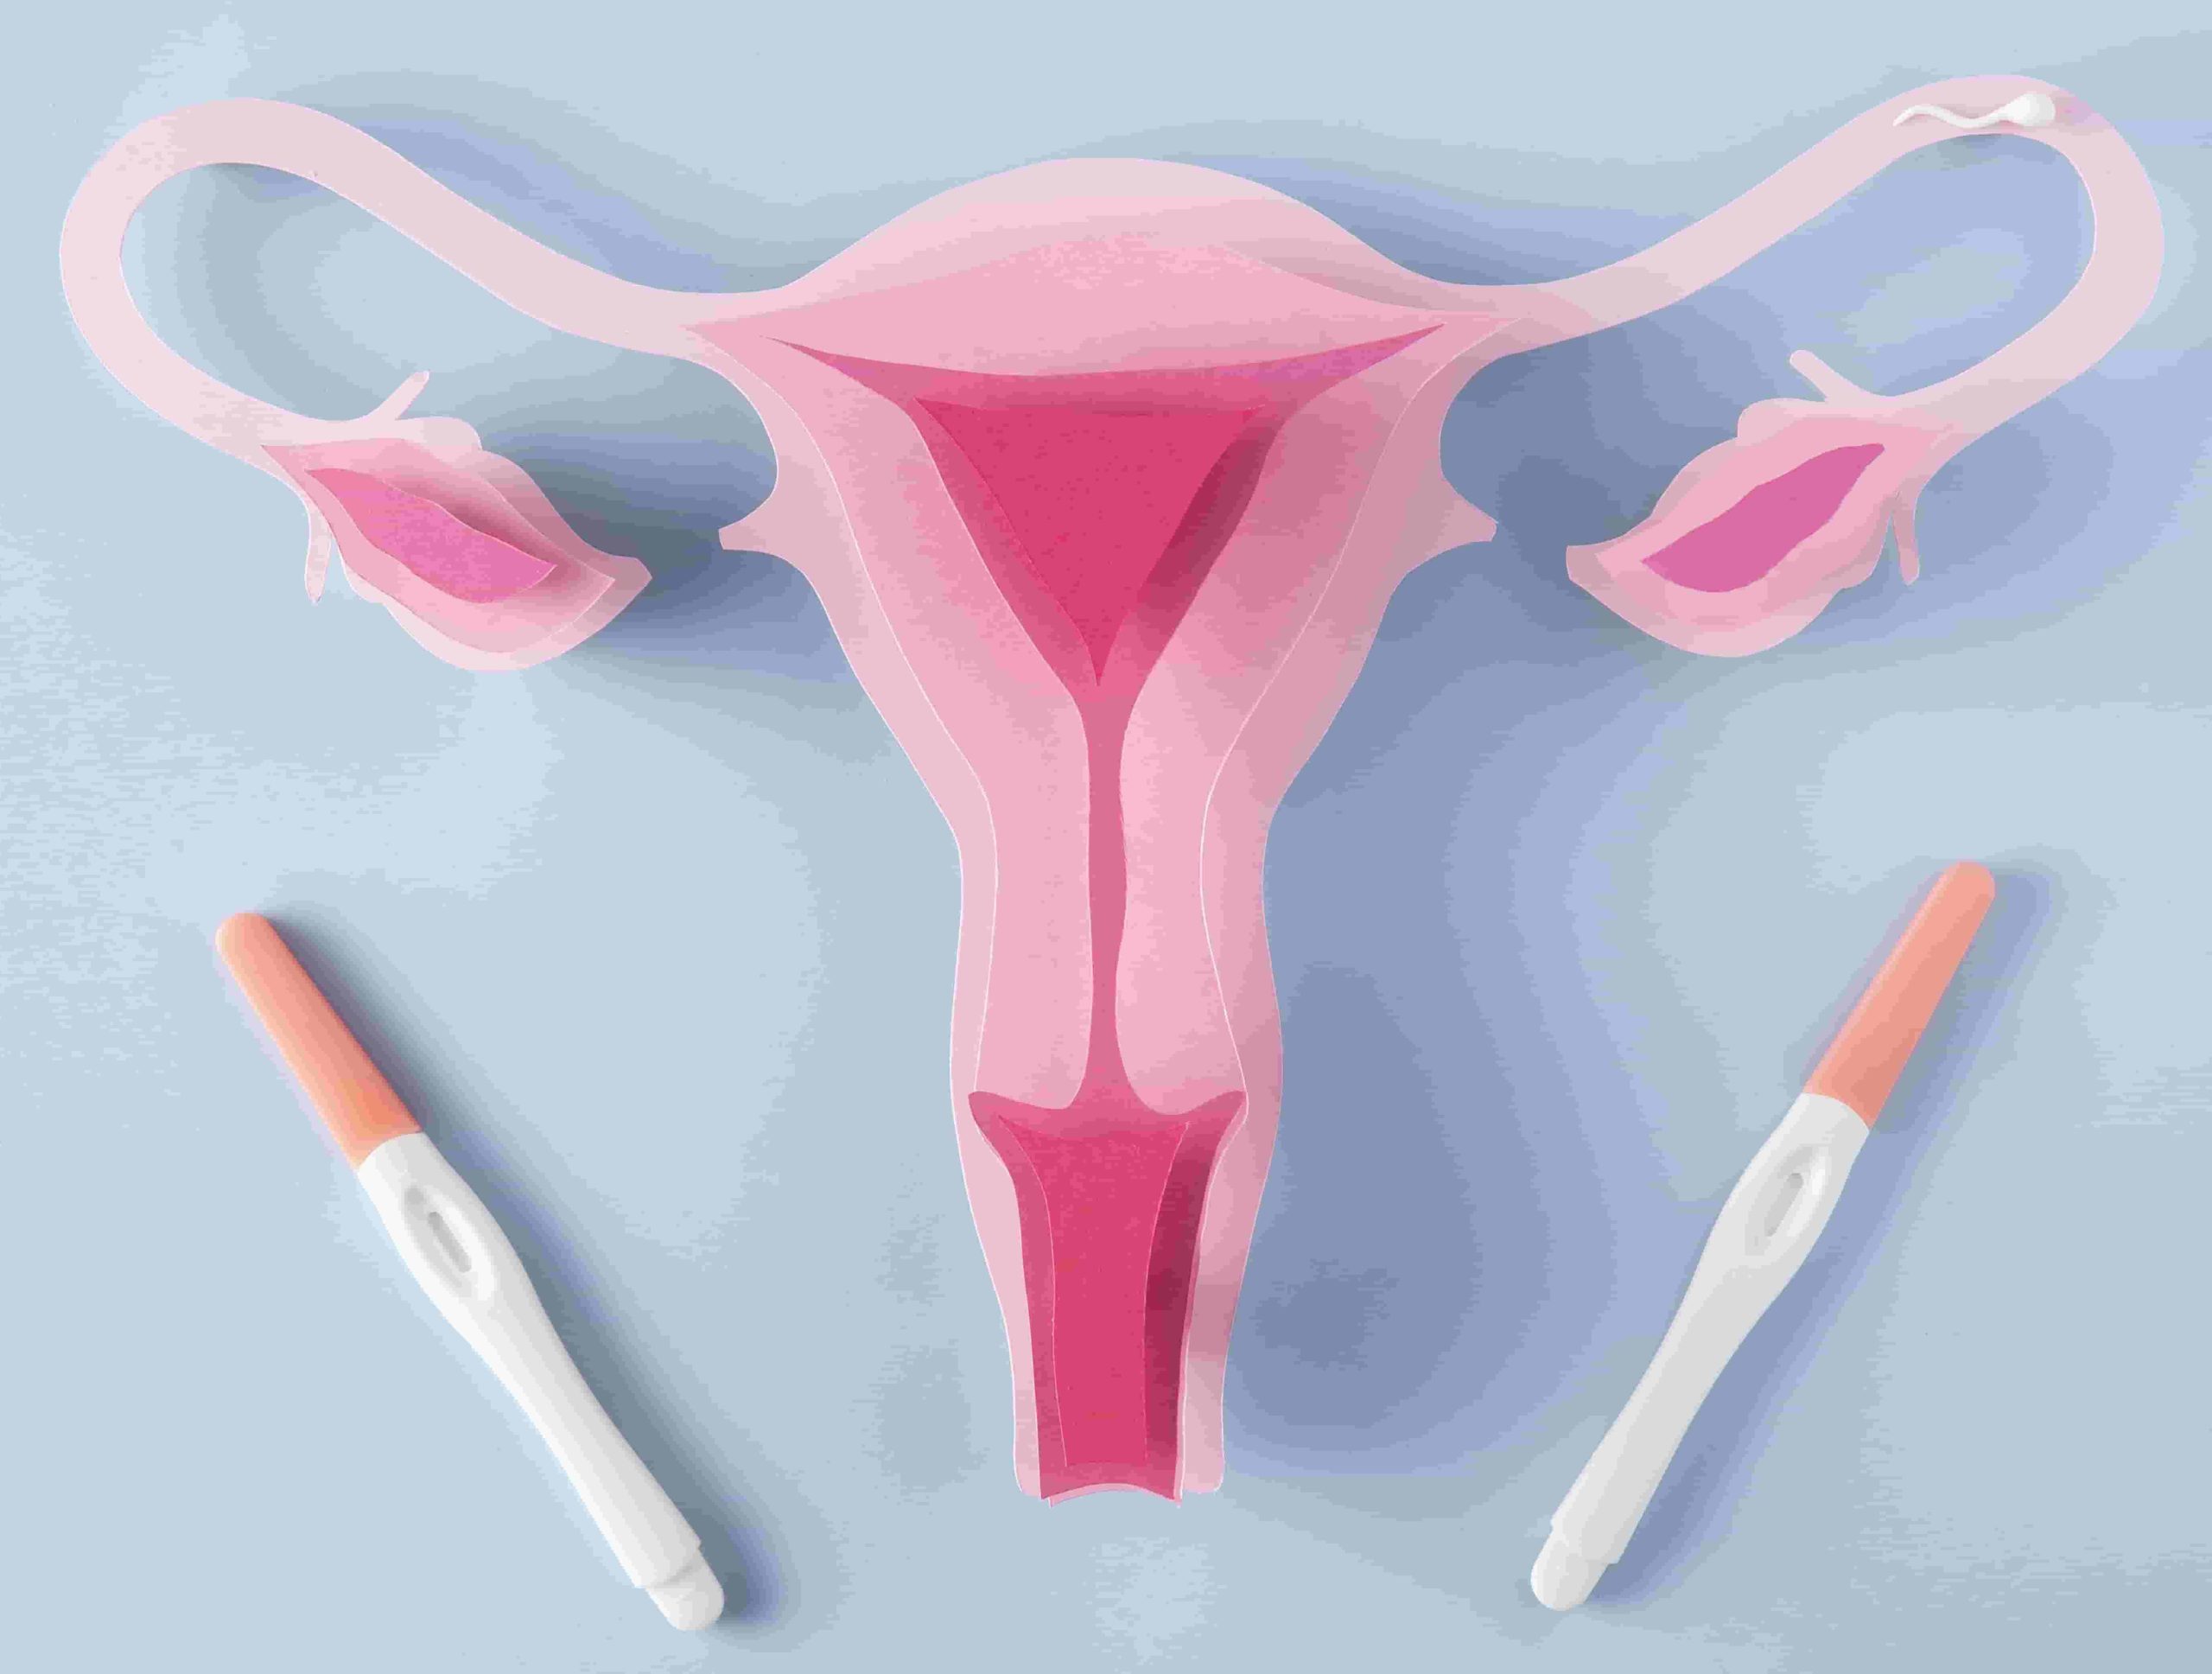 How accurate are home pregnancy tests?